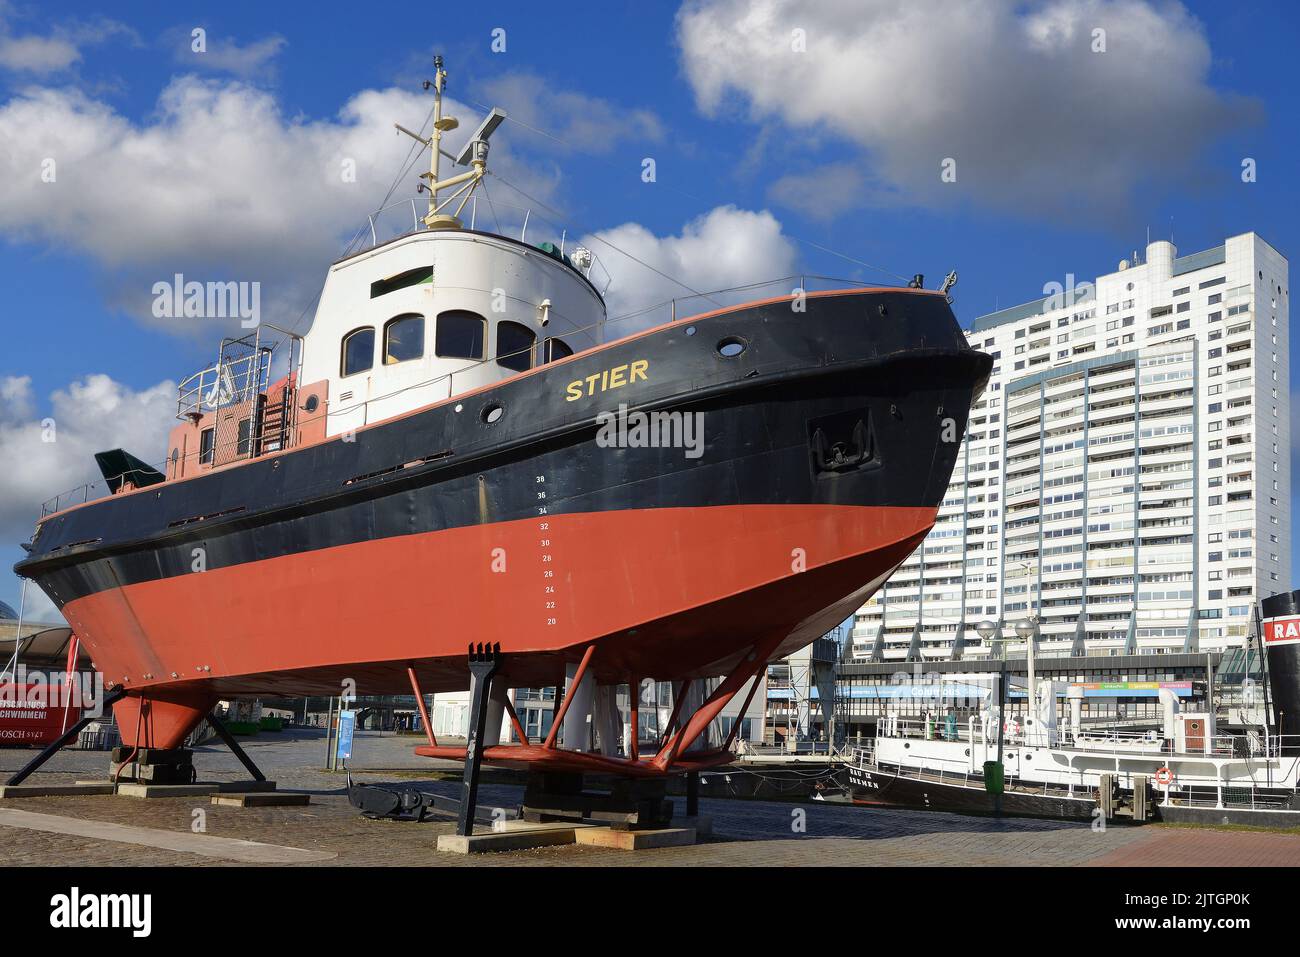 Ship Stier in front of Columbus Center in Bremerhaven, Germany, Bremerhaven Stock Photo